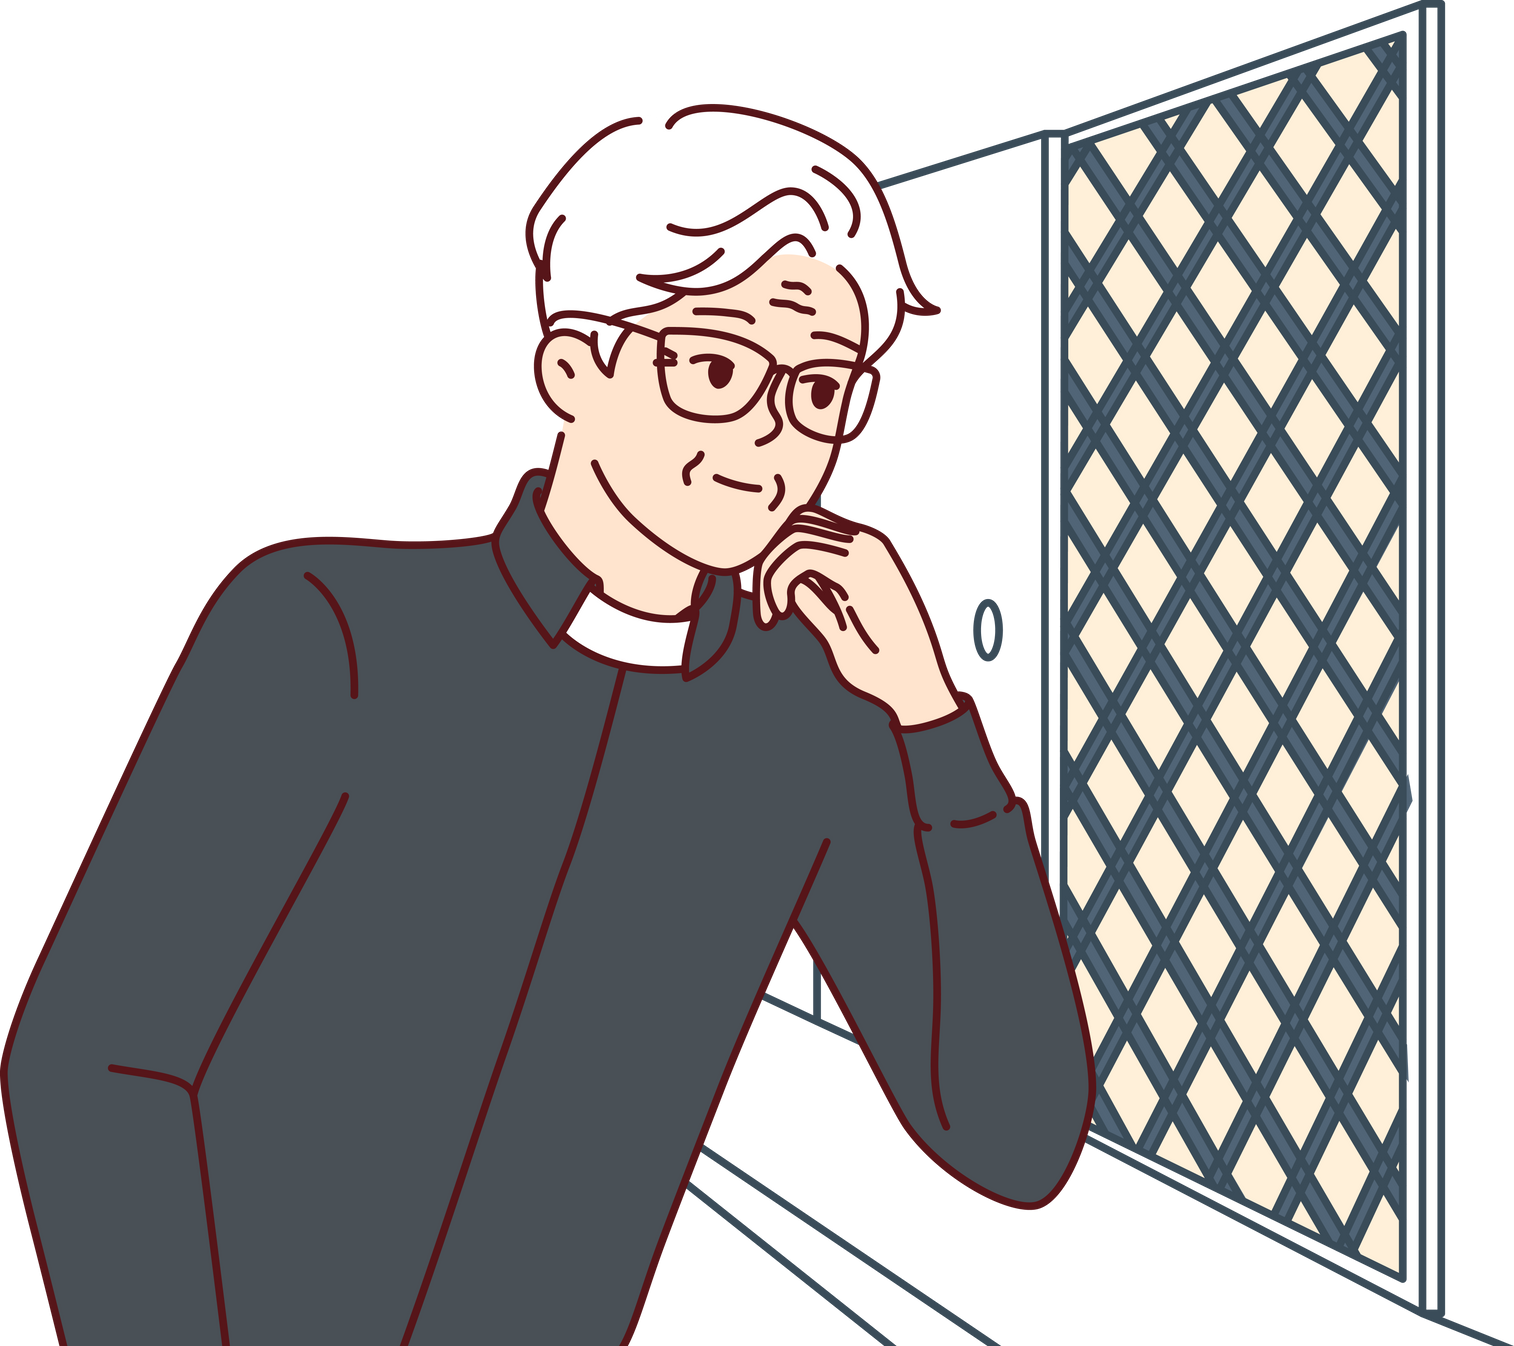 Man catholic priest listens to confession, located in church in room with mesh wall. Elderly christian minister conducts confession procedure, allowing parishioners to remove burden from souls